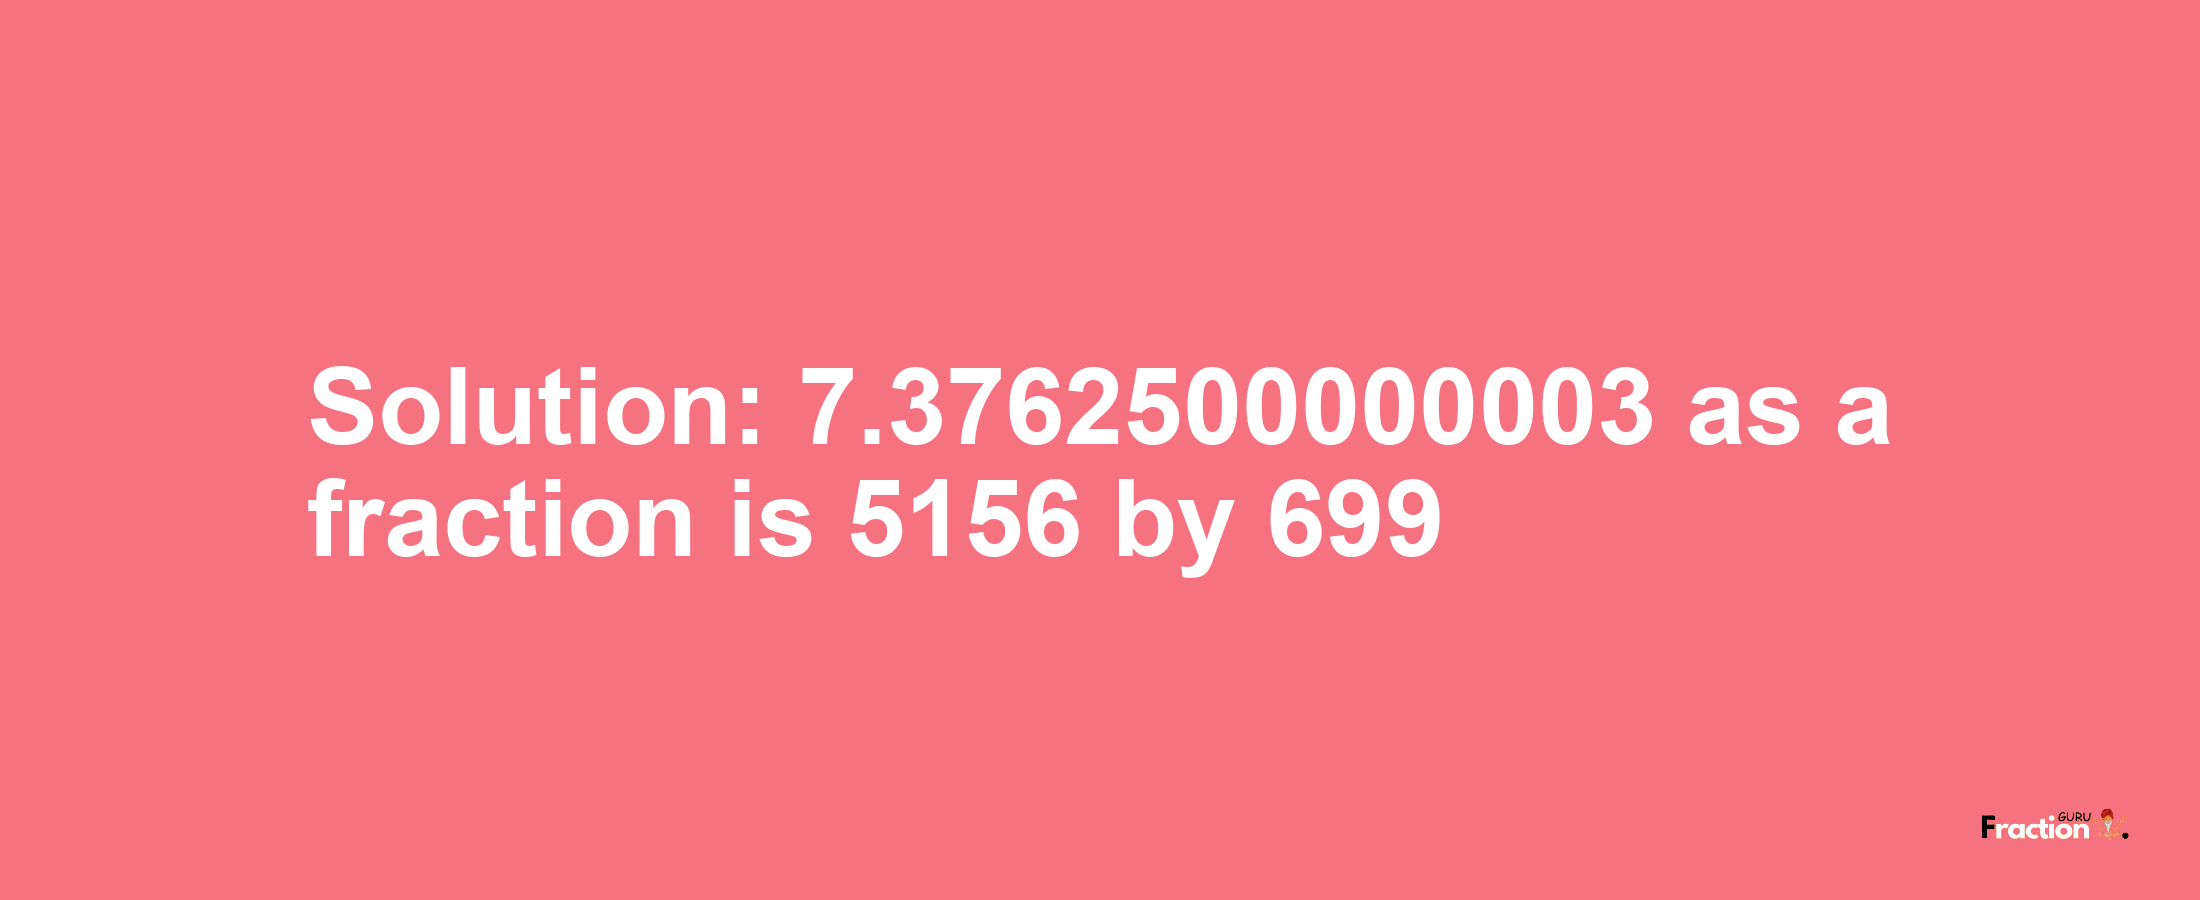 Solution:7.3762500000003 as a fraction is 5156/699